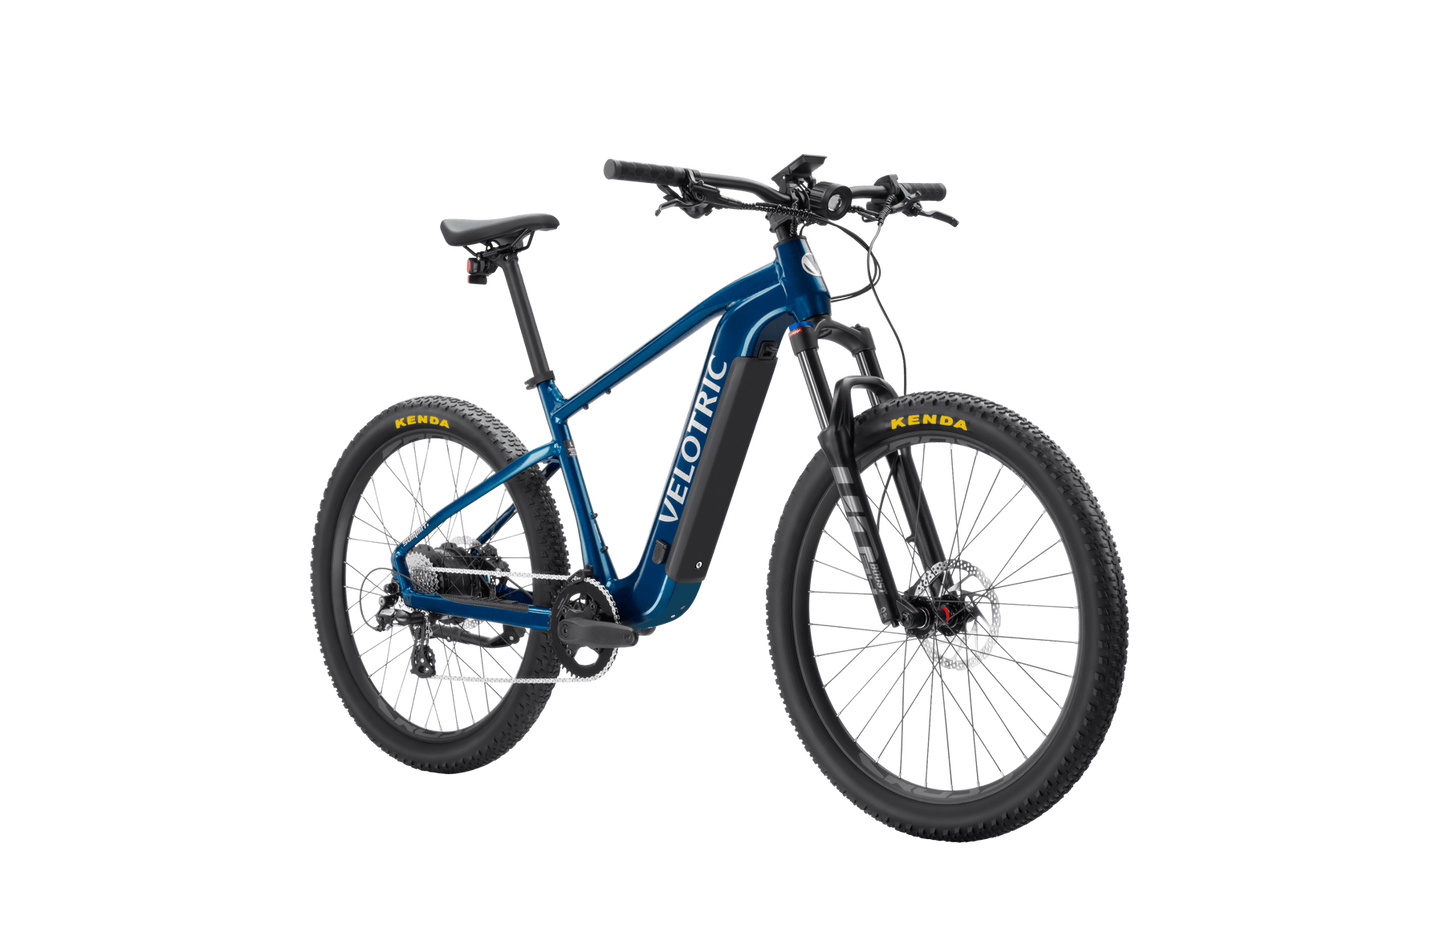 Velotric - Summit 1 electric mountain eBike in blue and black, featuring a thick frame, front suspension, pedal assist, and prominently displayed Velotric logos on a black background.